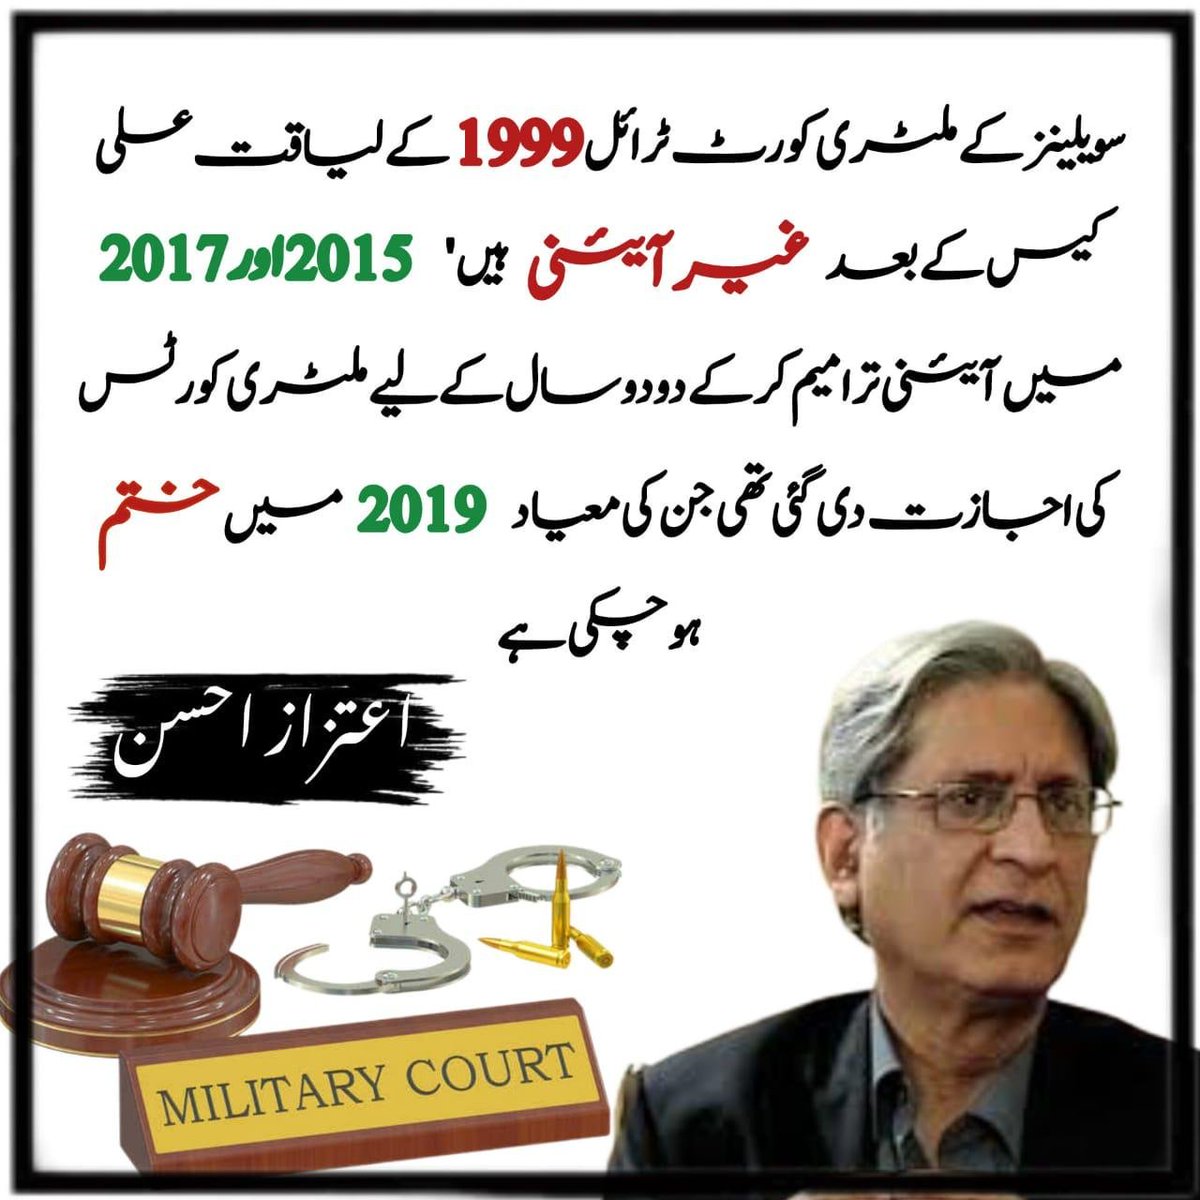 Military courts undermine the principles of justice and violate human rights. Fair trials and due process must be upheld for a truly democratic society. It's time to prioritize civilian justice systems rather than military courts. 
 #MilitaryCourtsViolateRights